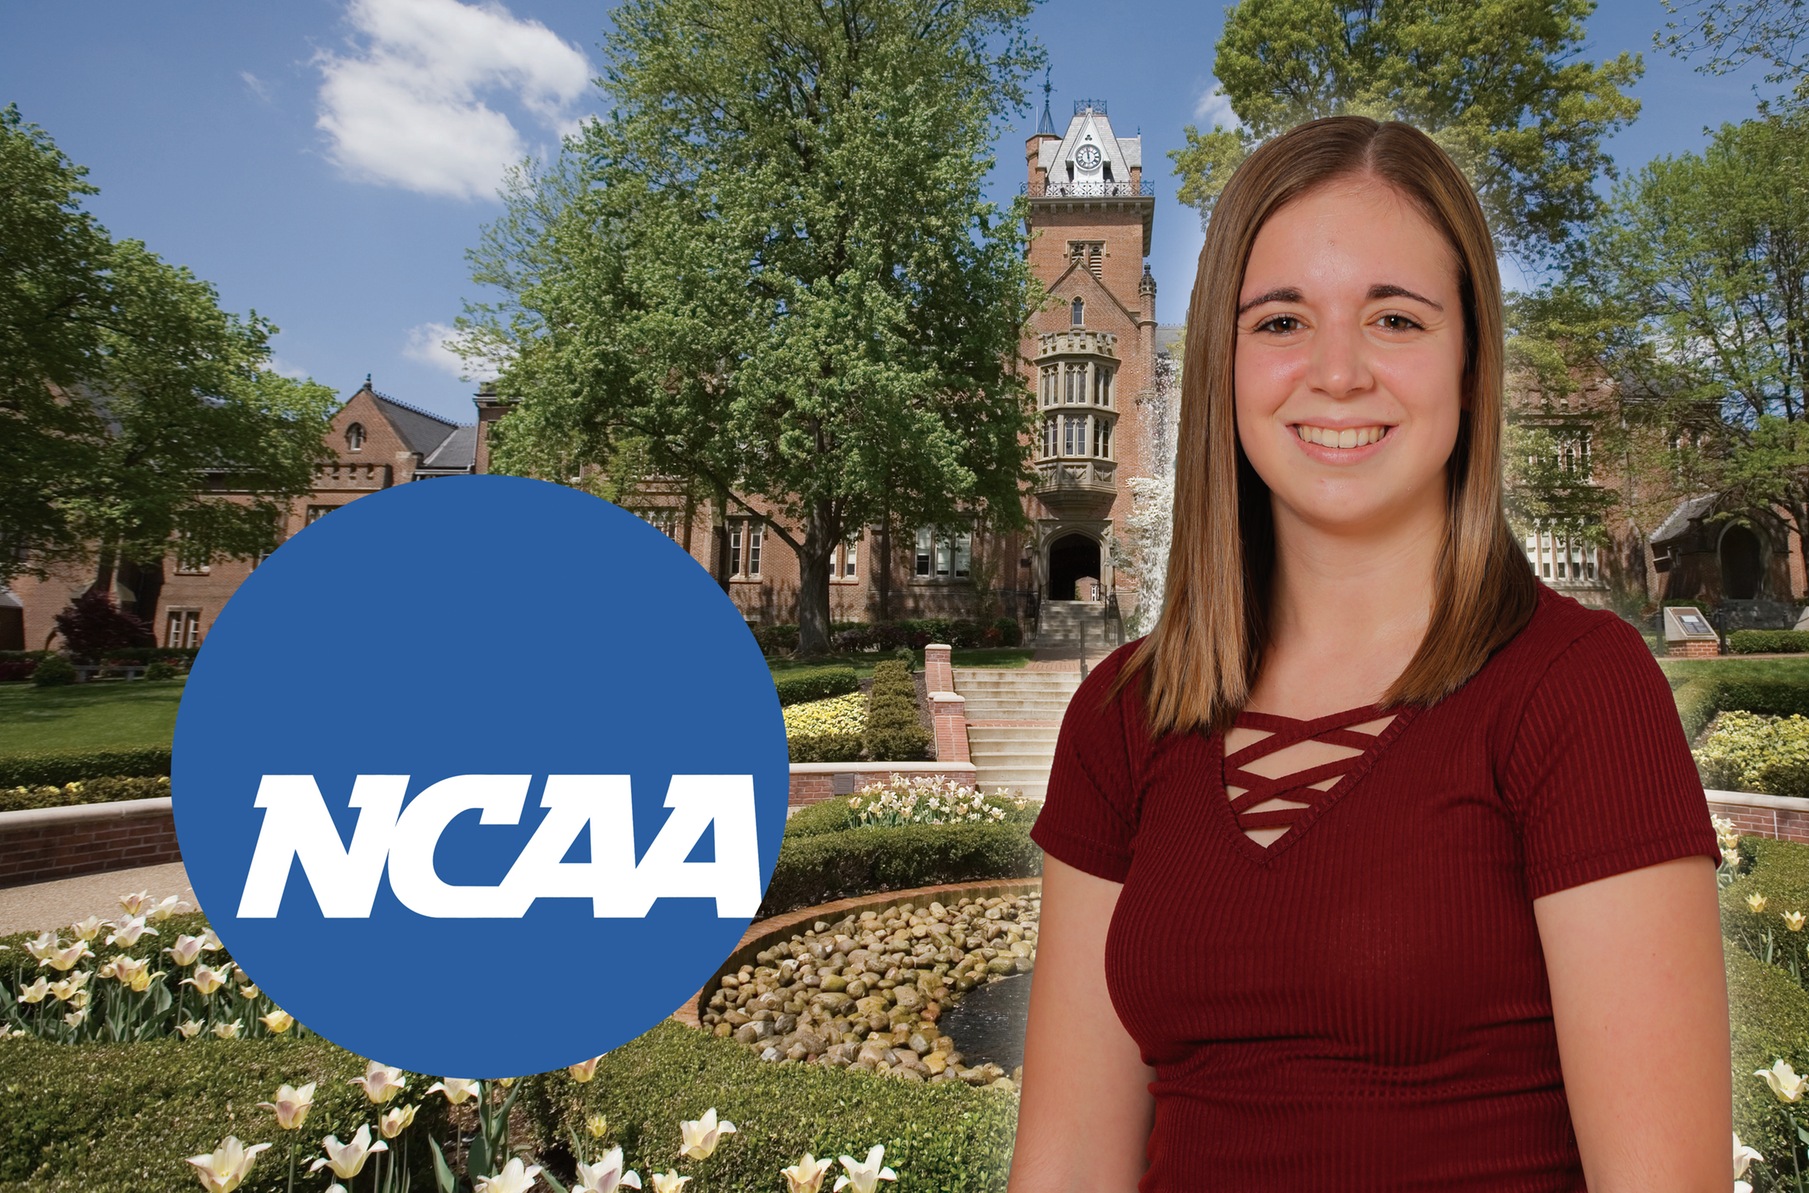 PAC selects Simpson as NCAA Woman of the Year nominee